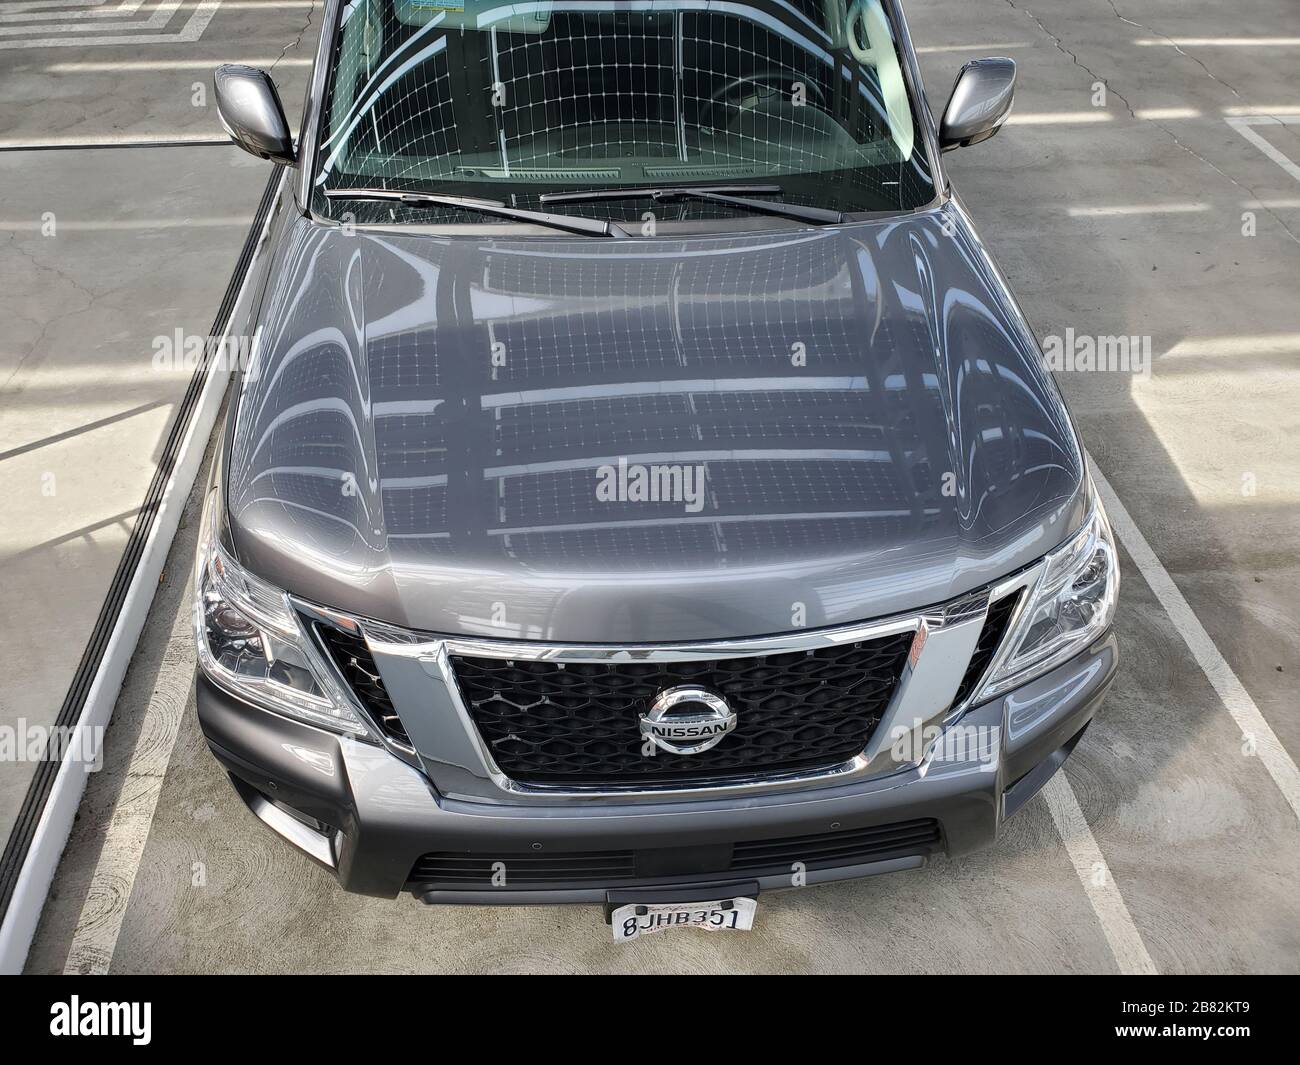 Aerial view of front portion of Nissan Armada full size Sports Utility Vehicle (SUV), San Ramon, California, March 5, 2020. () Stock Photo